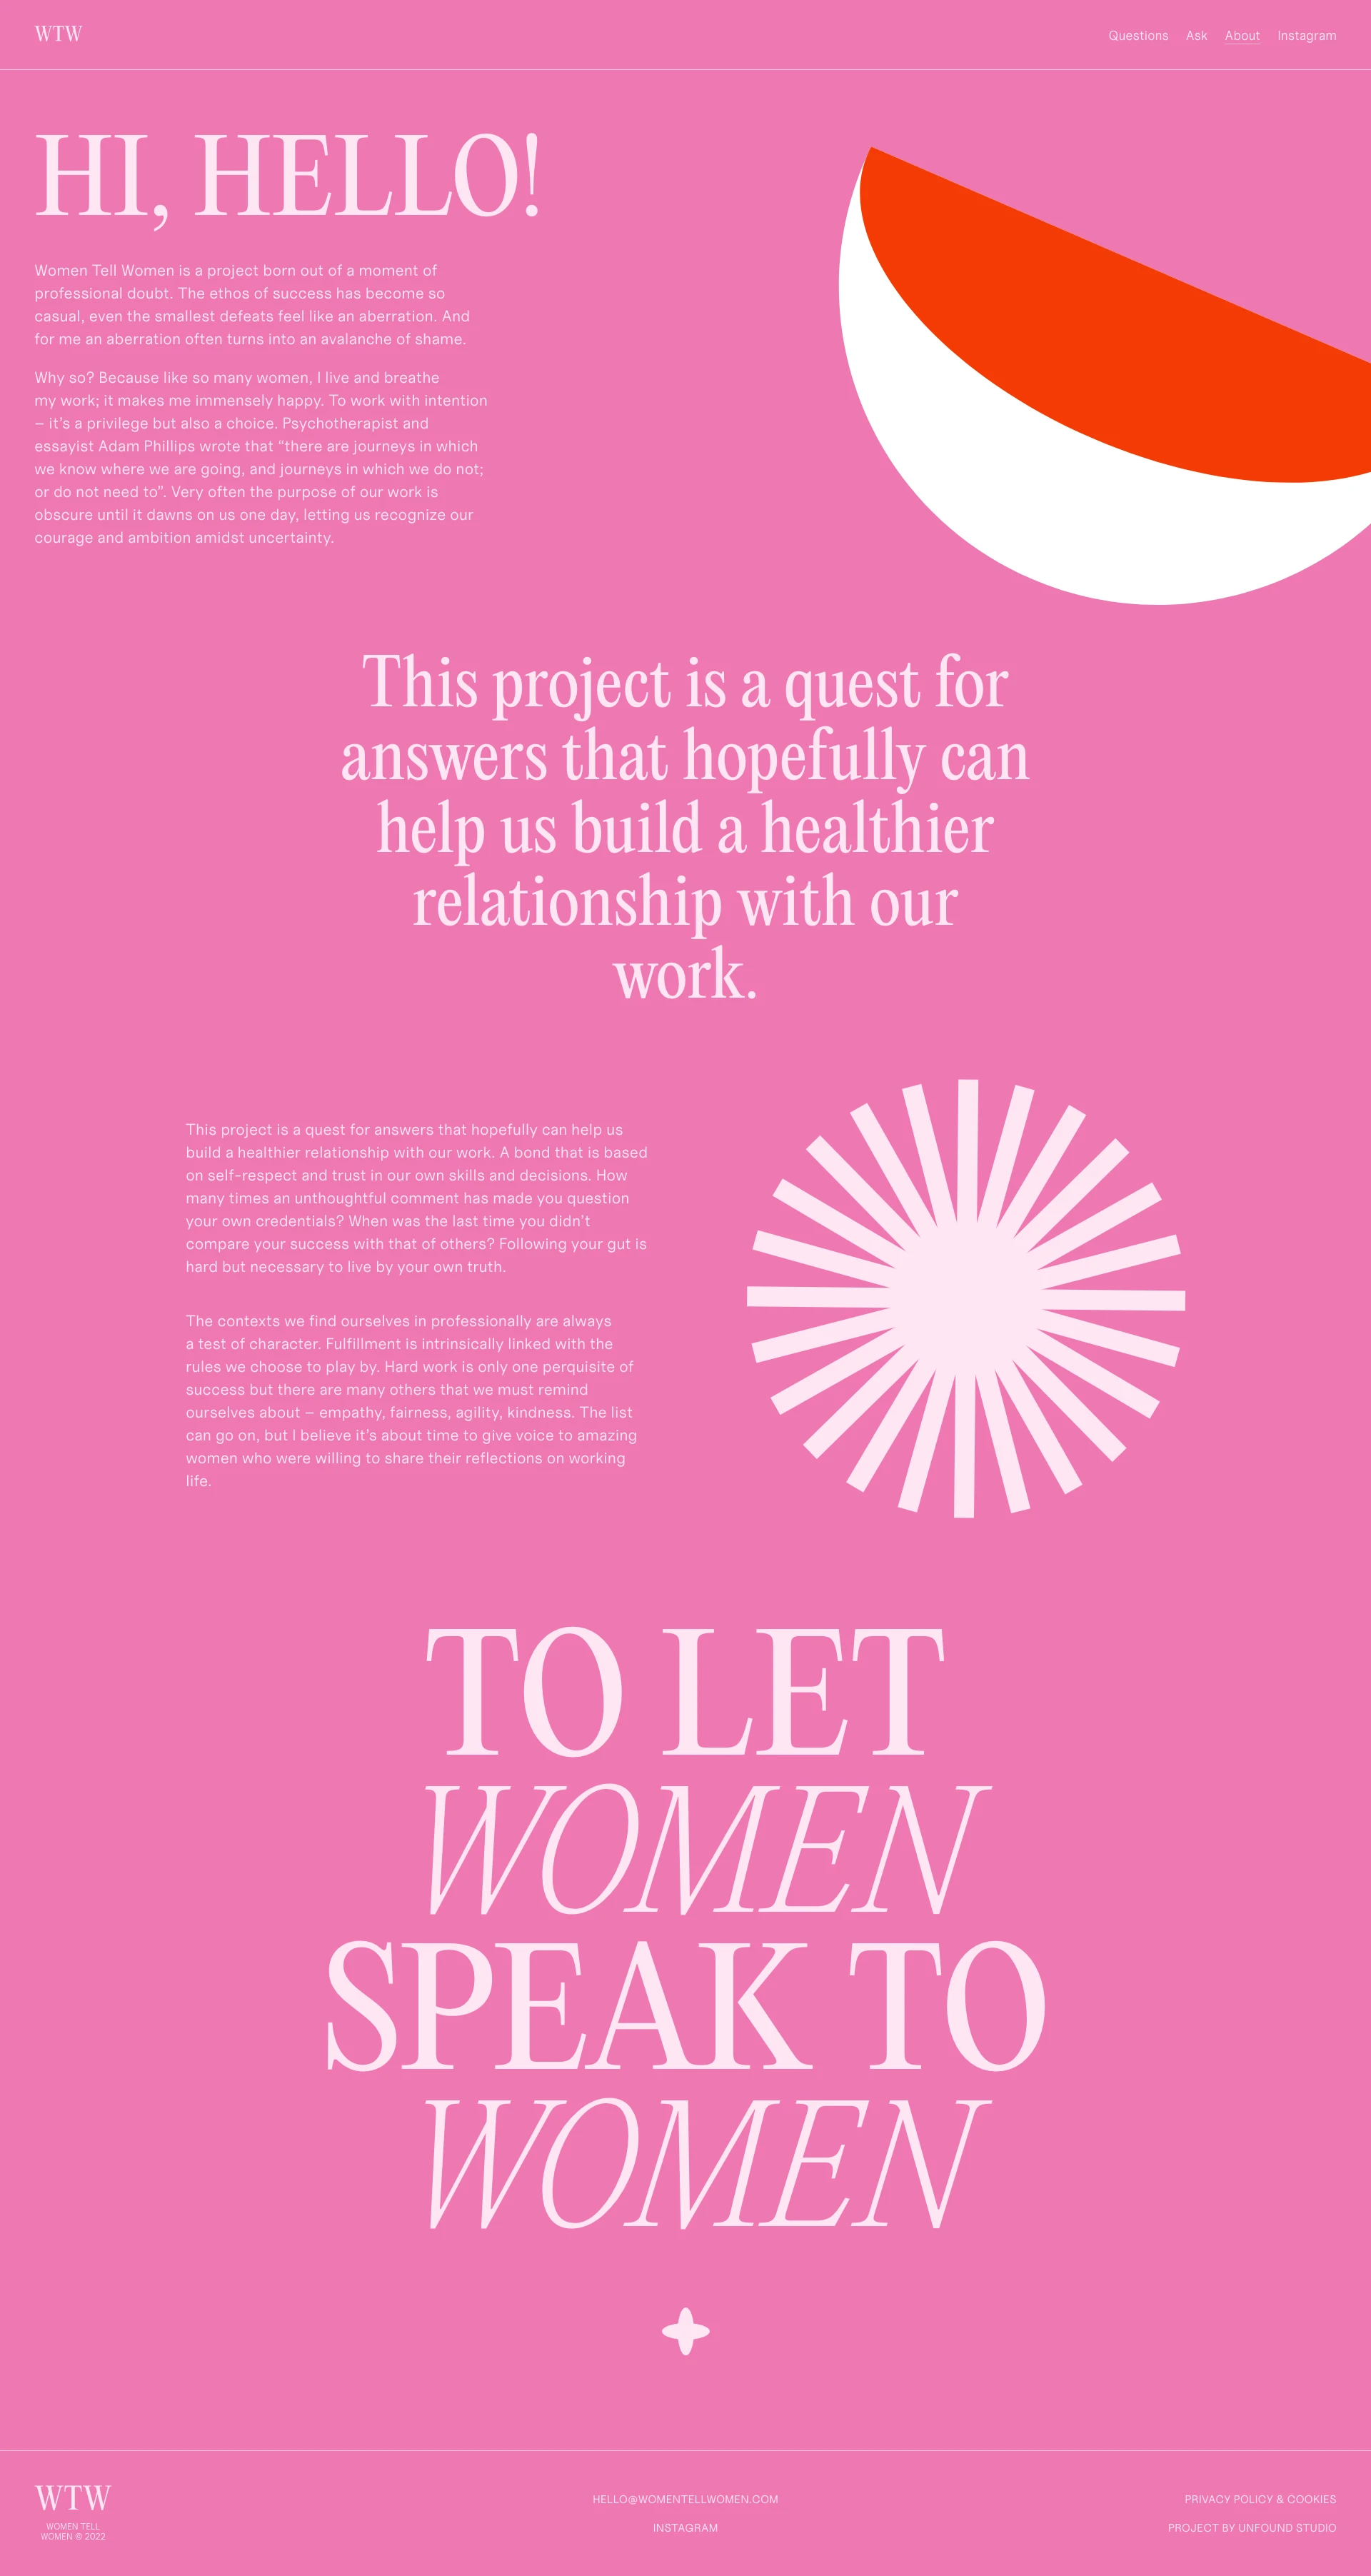 Women Tell Women Landing Page Example: Women Tell Women is a digital platform featuring pressure-free career advice to women who strive to build a healthy relationship with work. Discover career questions answered by female professionals from all over the world.